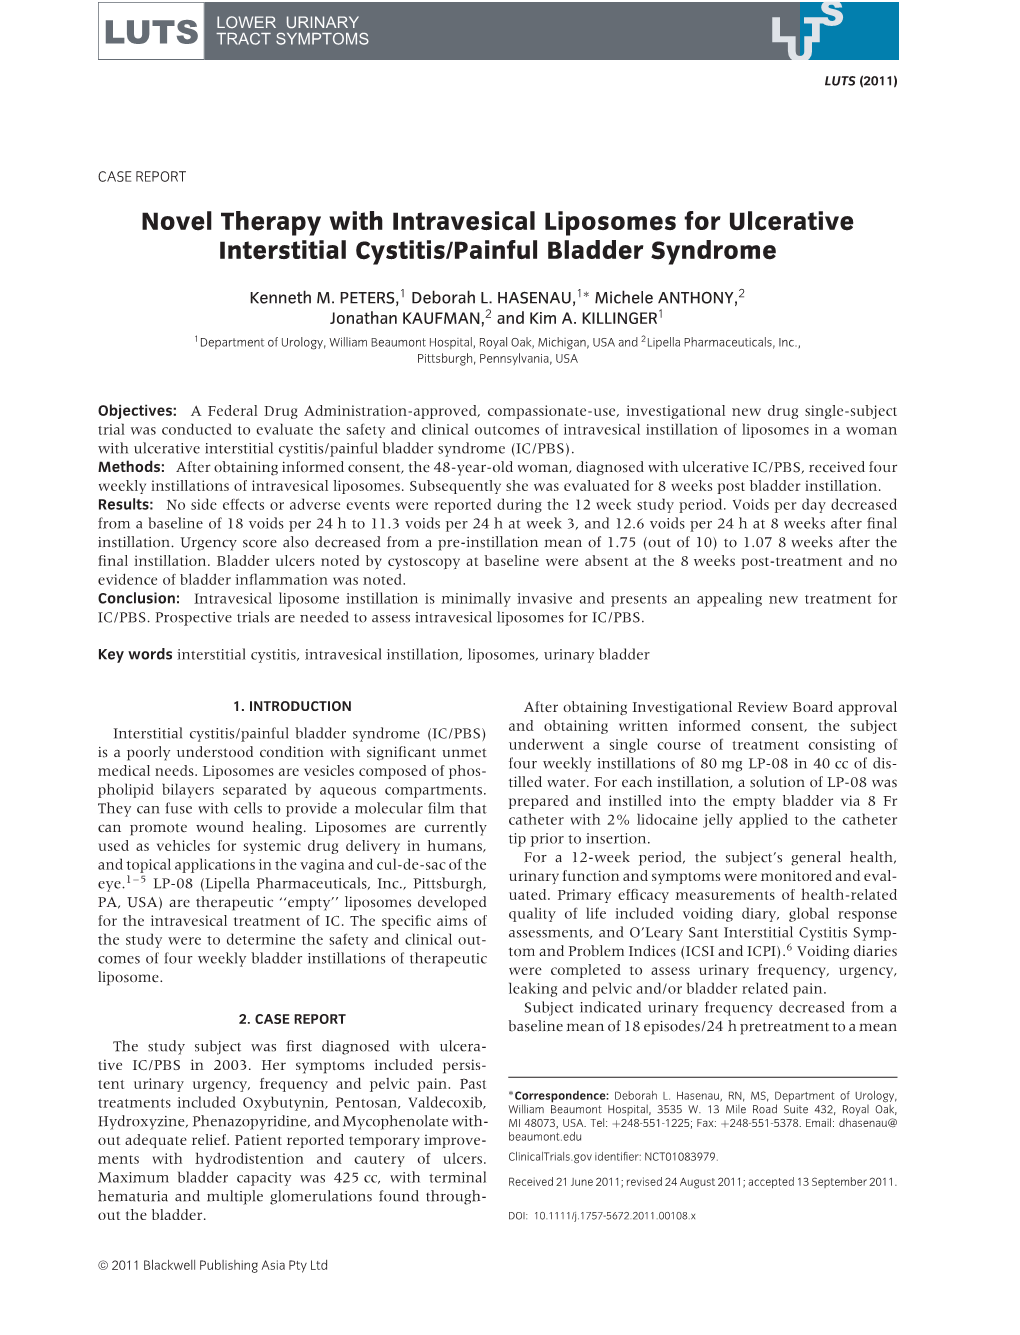 Novel Therapy with Intravesical Liposomes for Ulcerative Interstitial Cystitis/Painful Bladder Syndrome